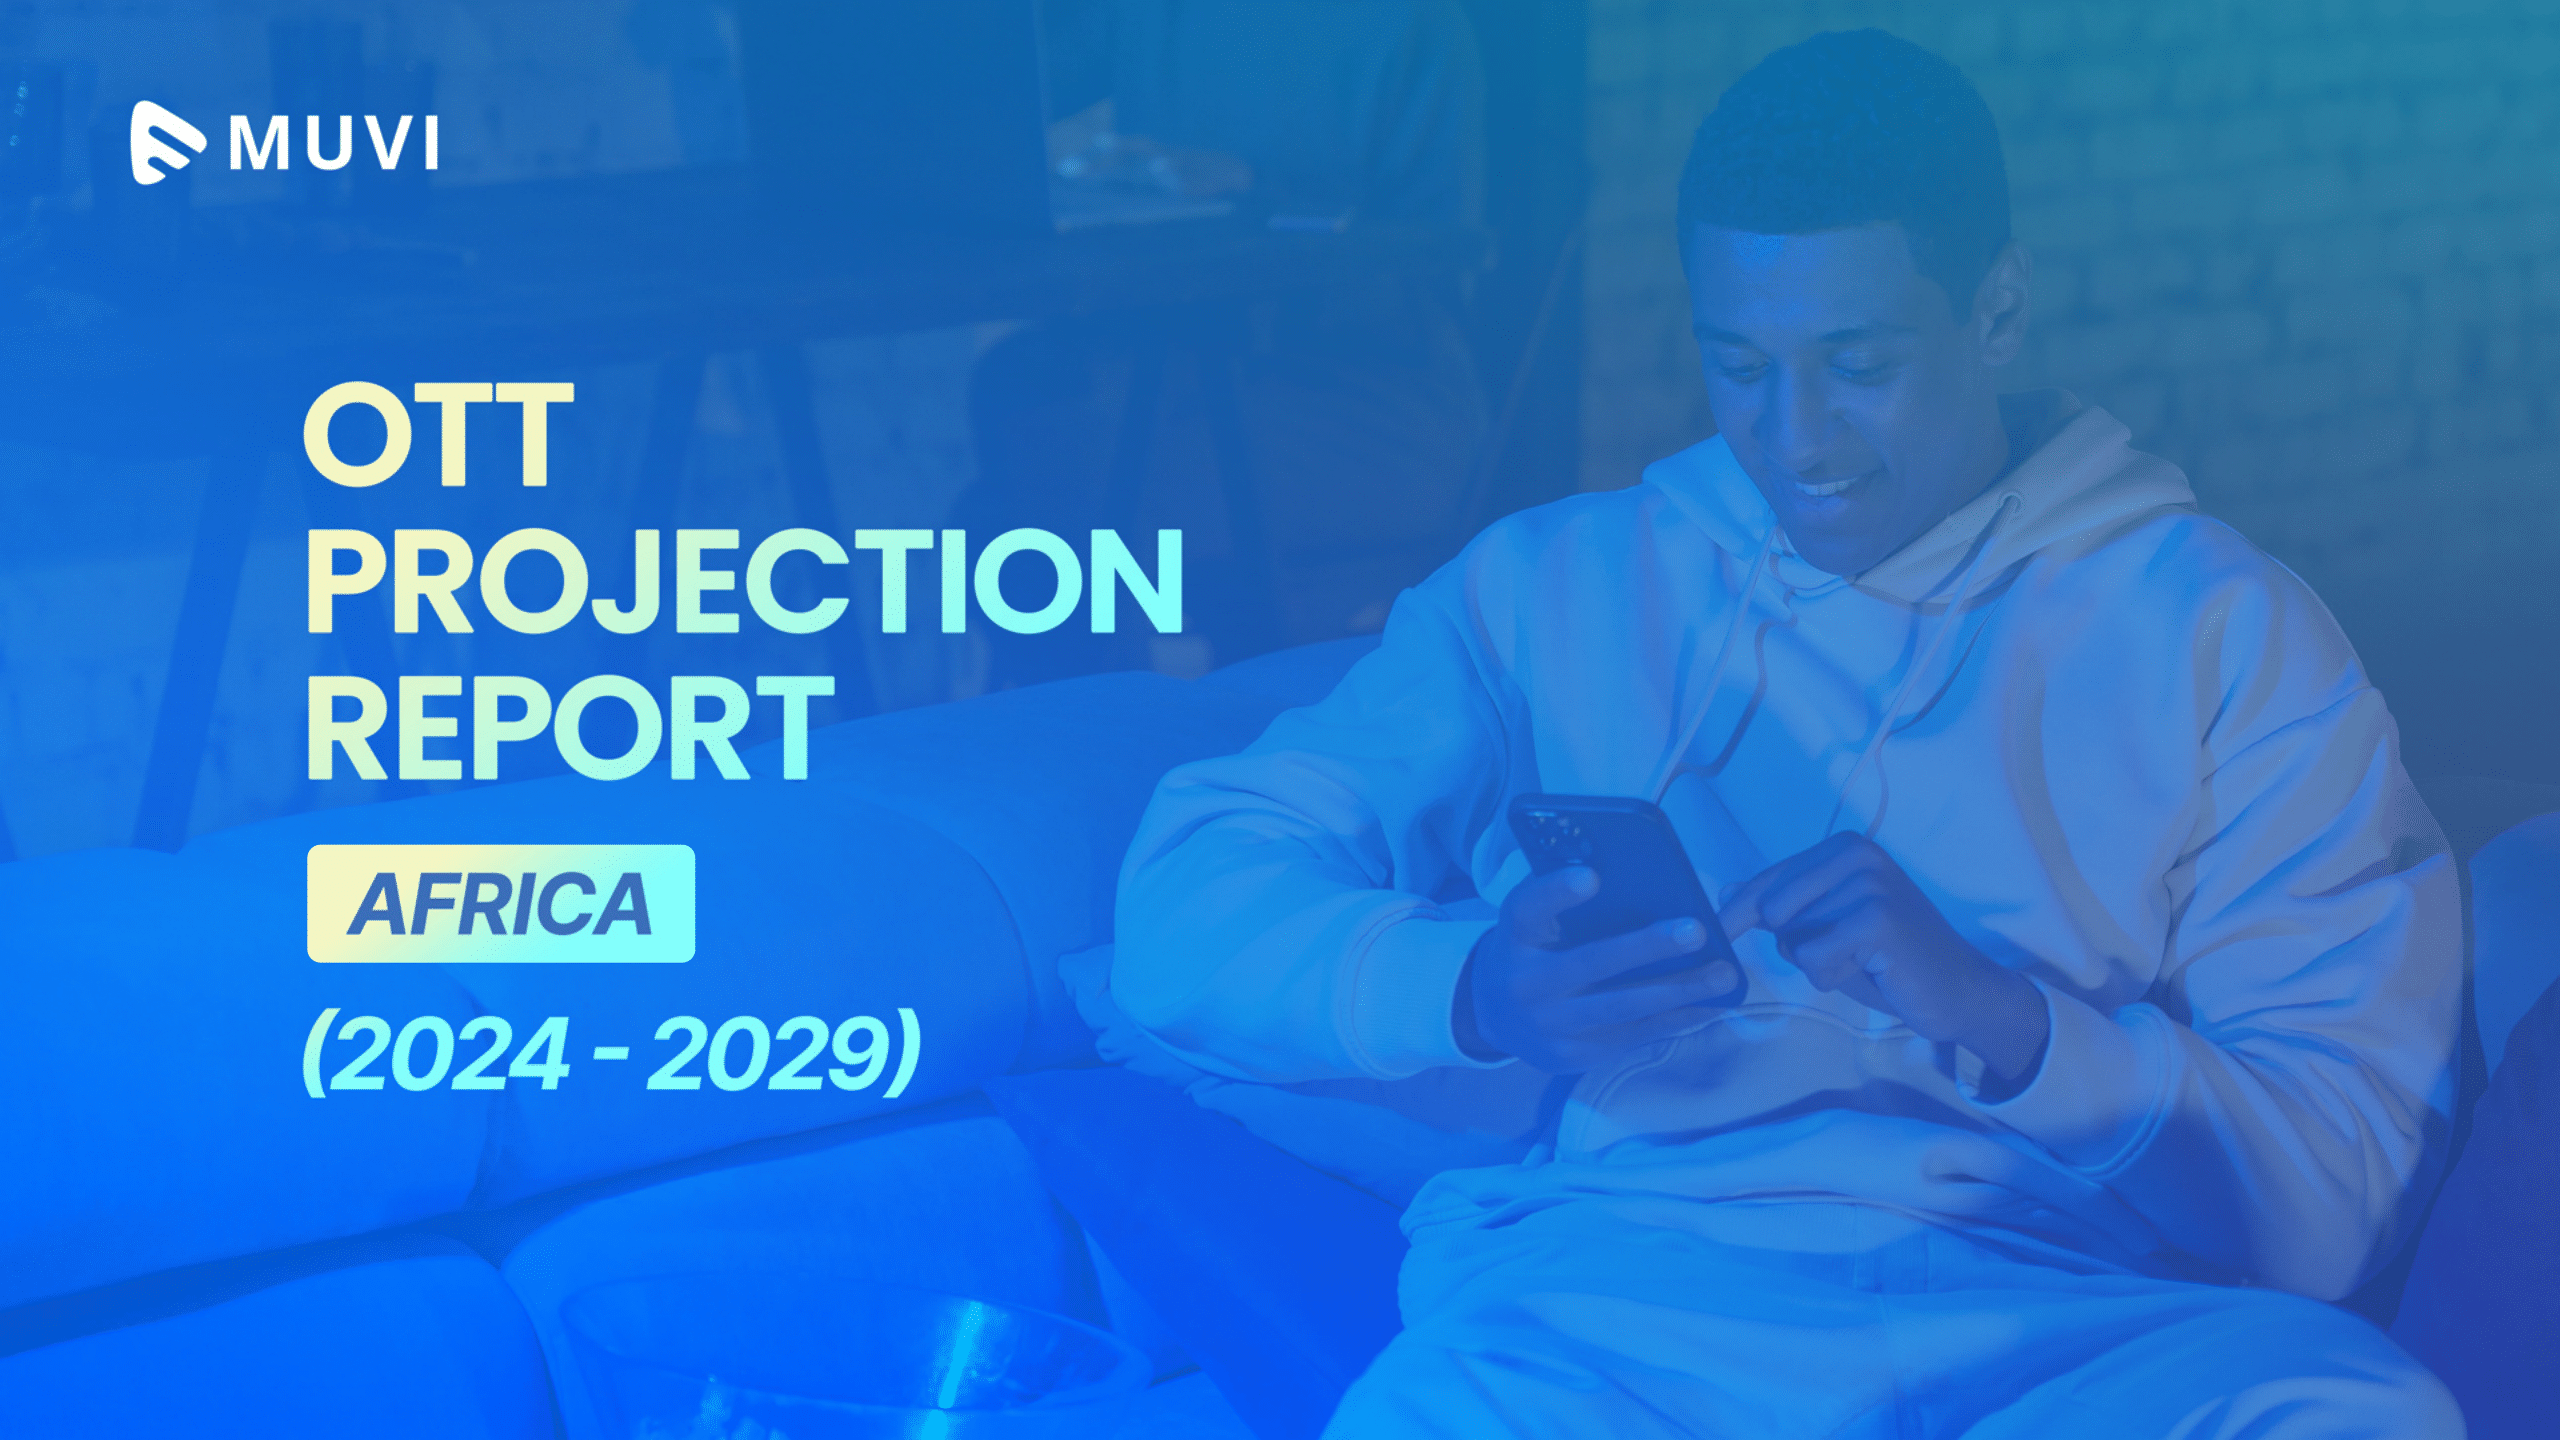 OTT Projection Report for Africa (2024-2029)